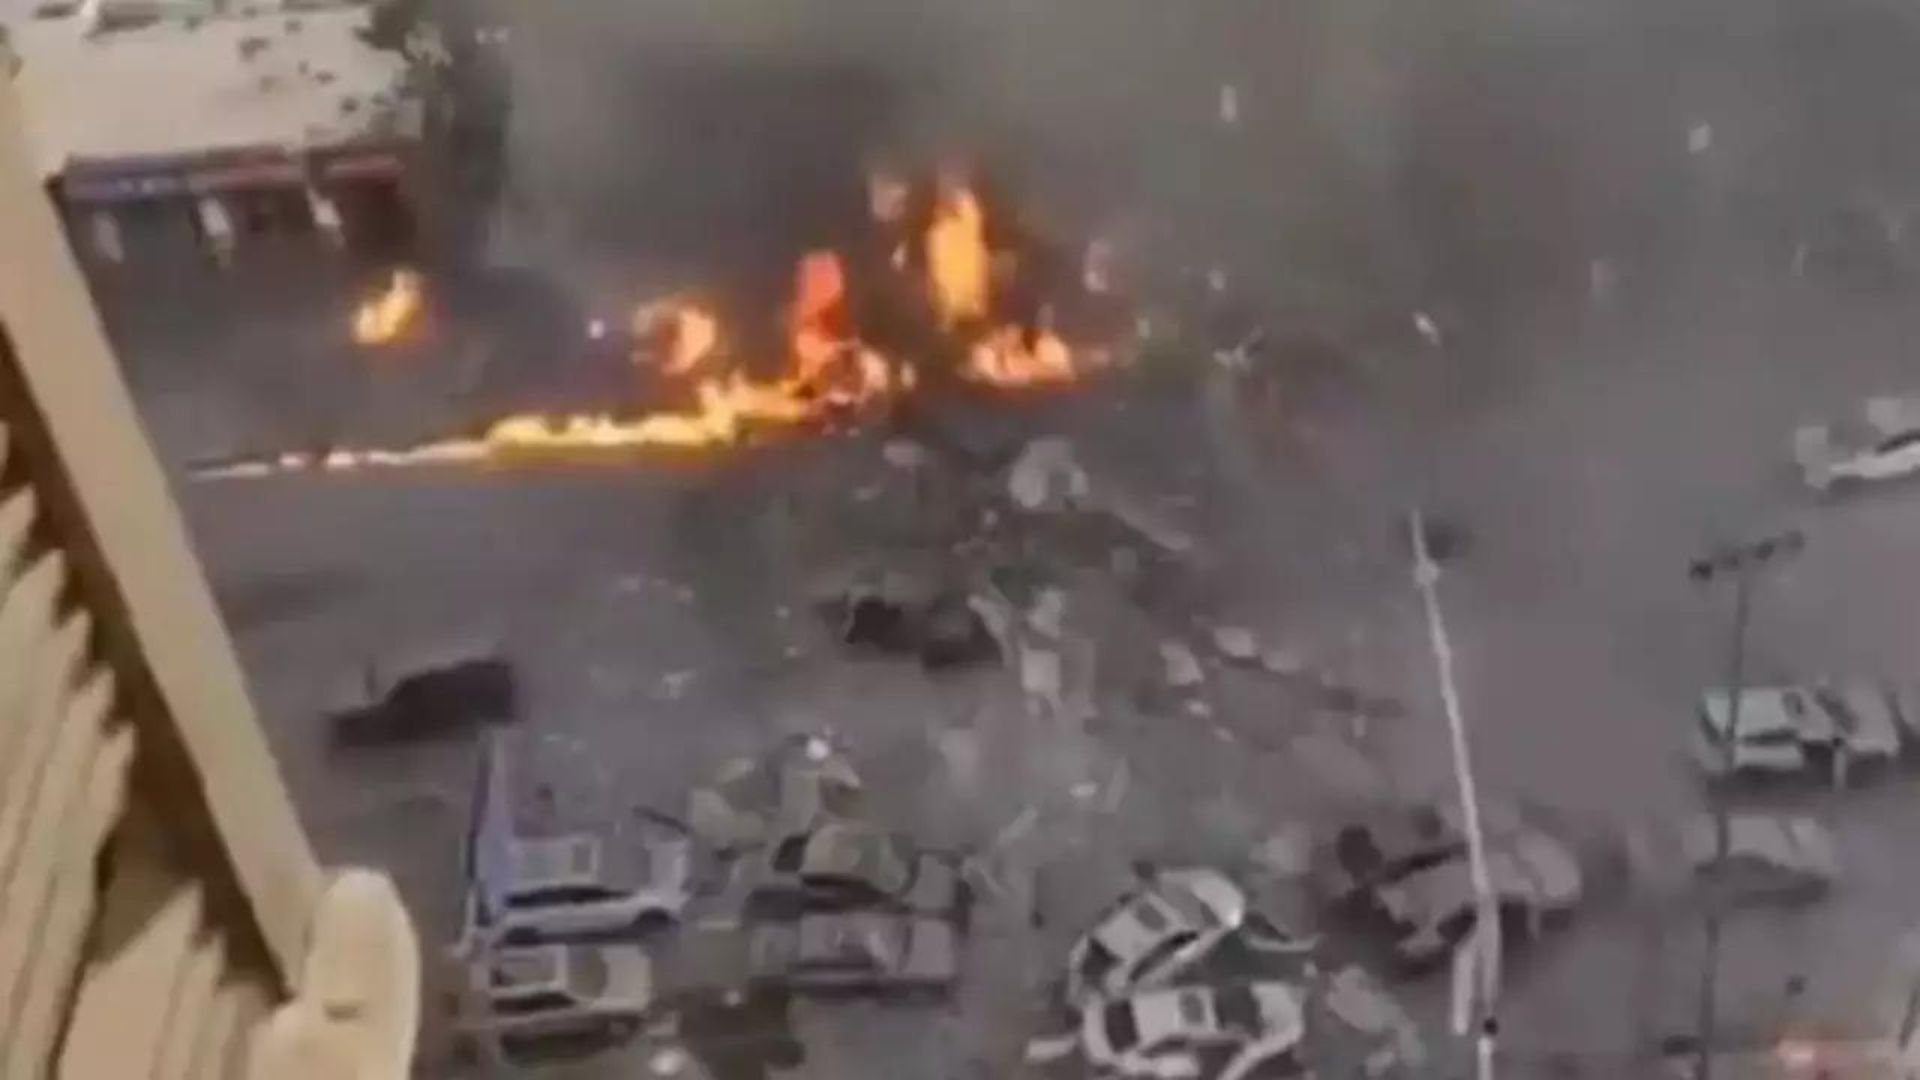 China: Deadly Explosion in Yanjiao Town leaves 7 Dead, 27 Injured, Global Times reported